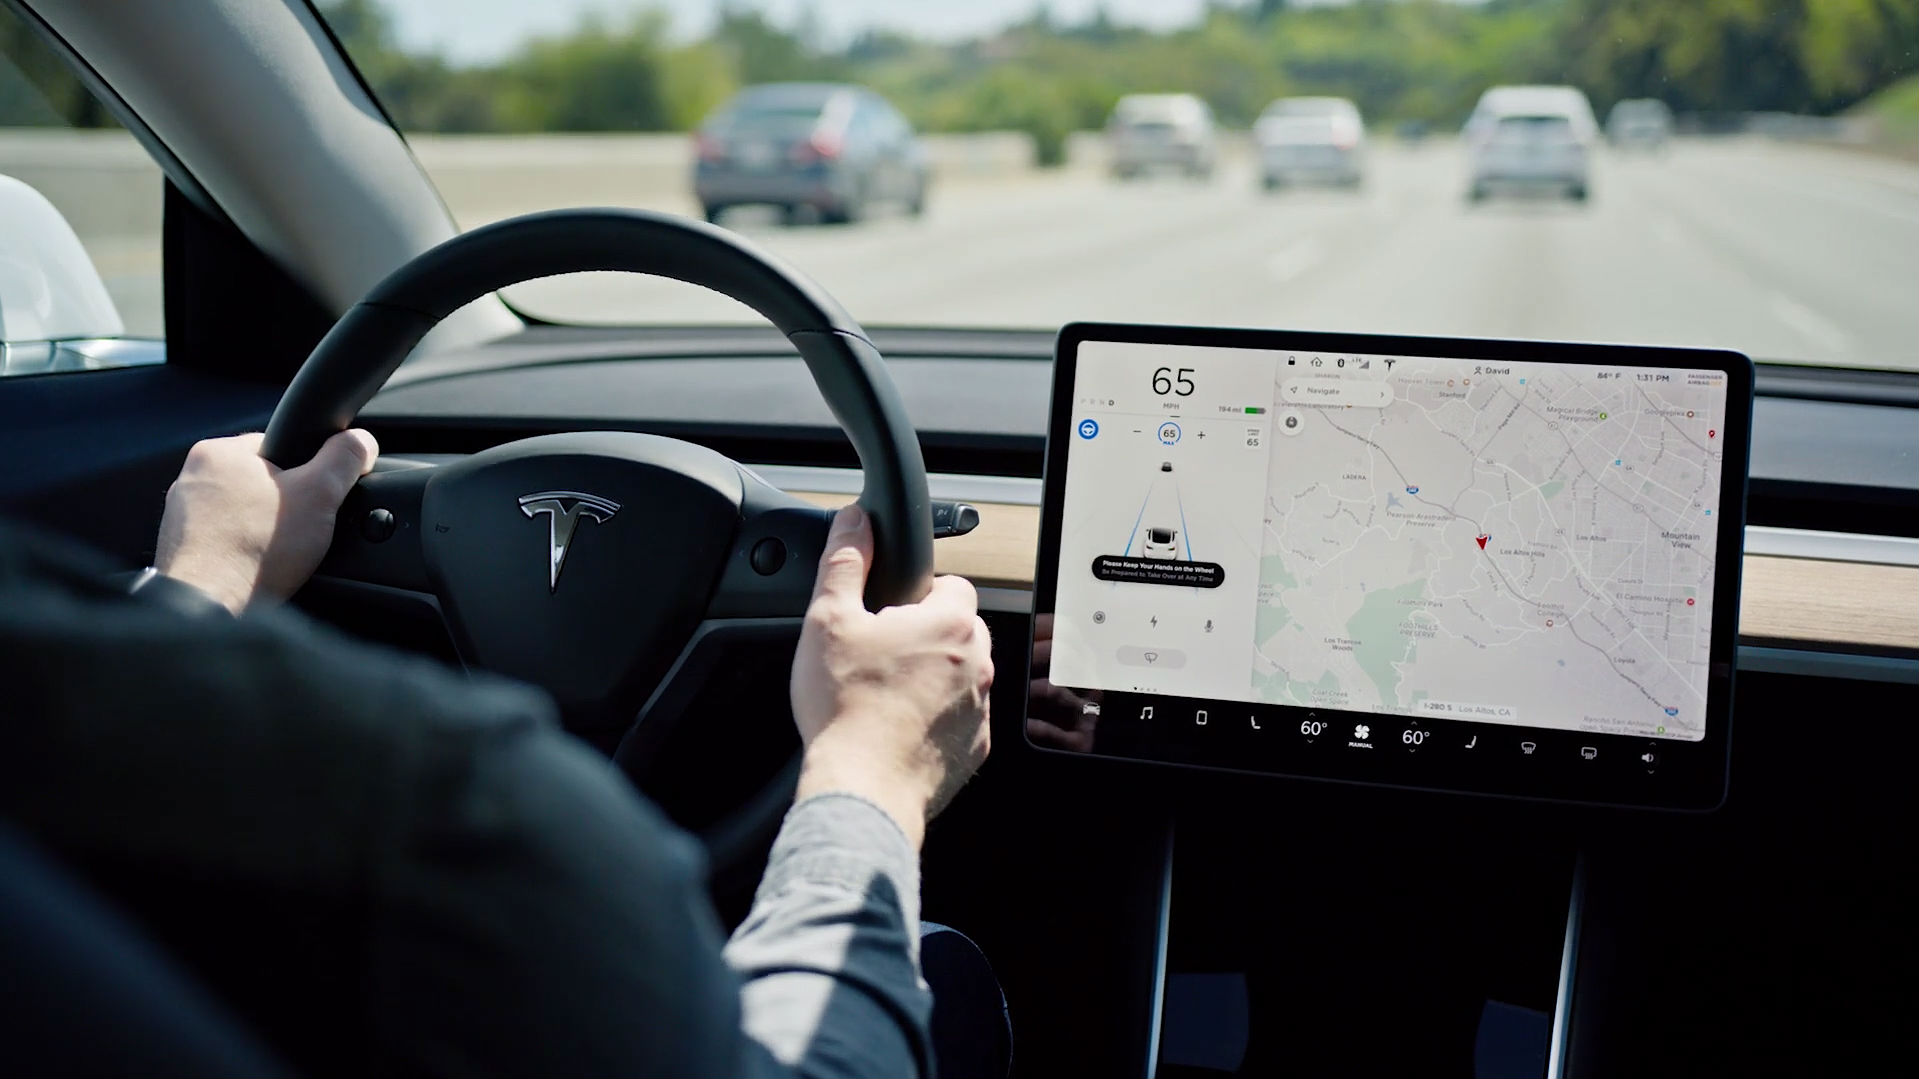 Tesla’s Vehicle Safety Report reveals drivers on Autopilot are safer from accidents and ‘near-crashes’